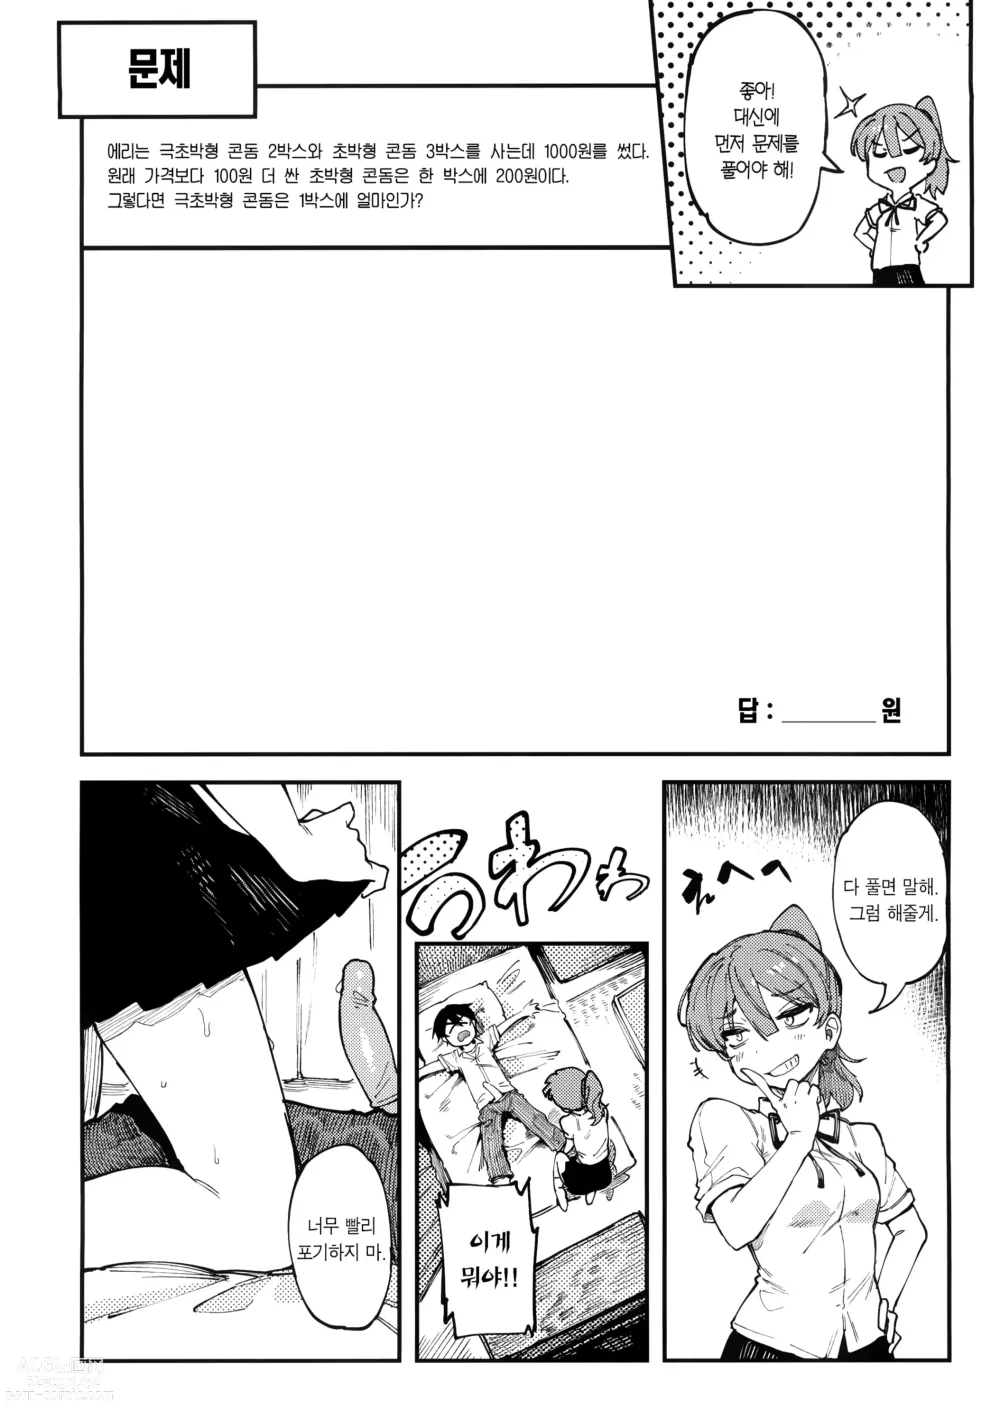 Page 30 of doujinshi 수학 1 상 (decensored)